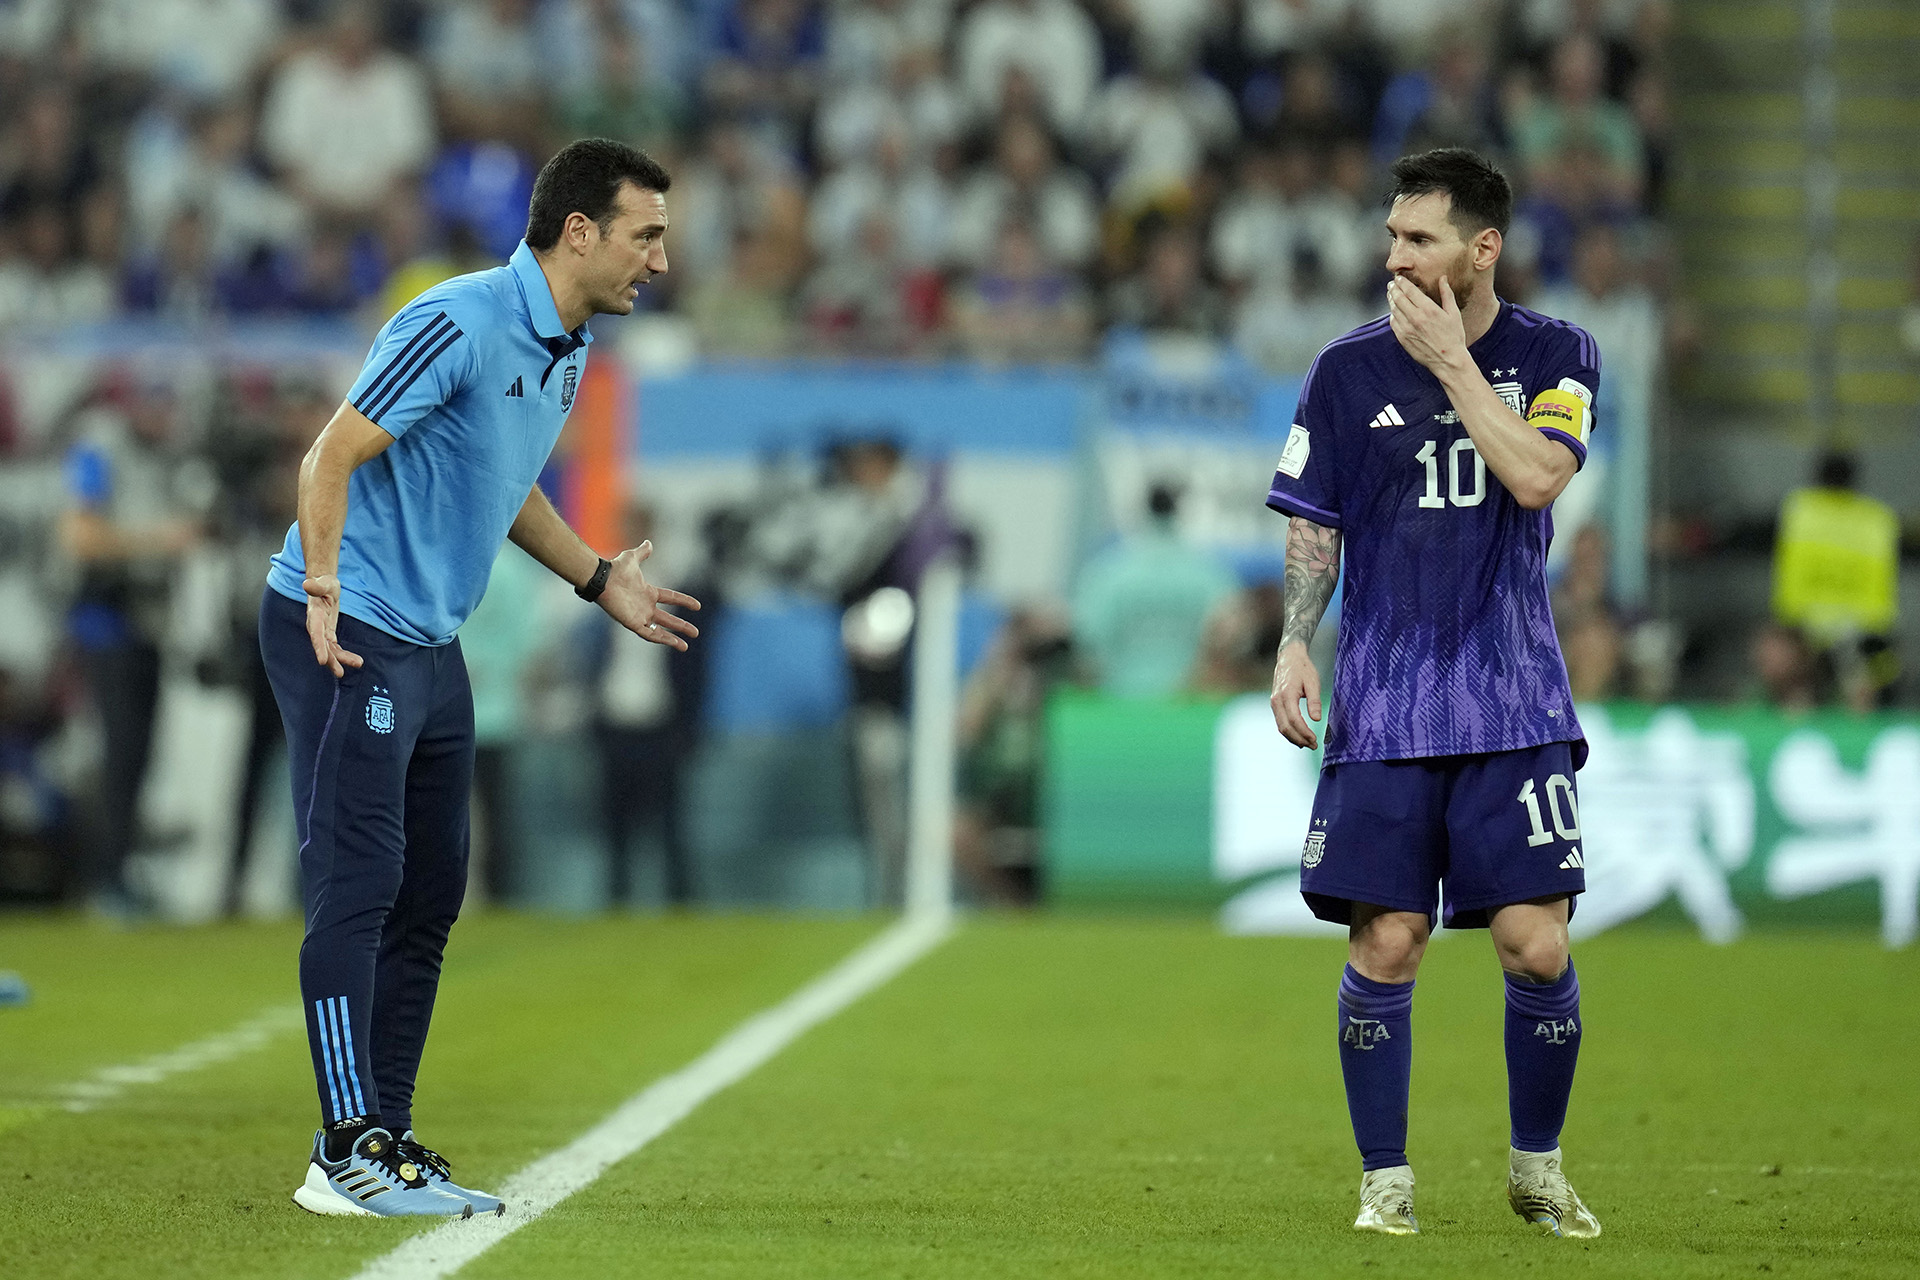 Argentina's head coach Lionel Scaloni, left, speaks with Lionel Messi during the World Cup group C soccer match between Poland and Argentina at the Stadium 974 in Doha, Qatar, Wednesday, Nov. 30, 2022. (AP Photo/Natacha Pisarenko)